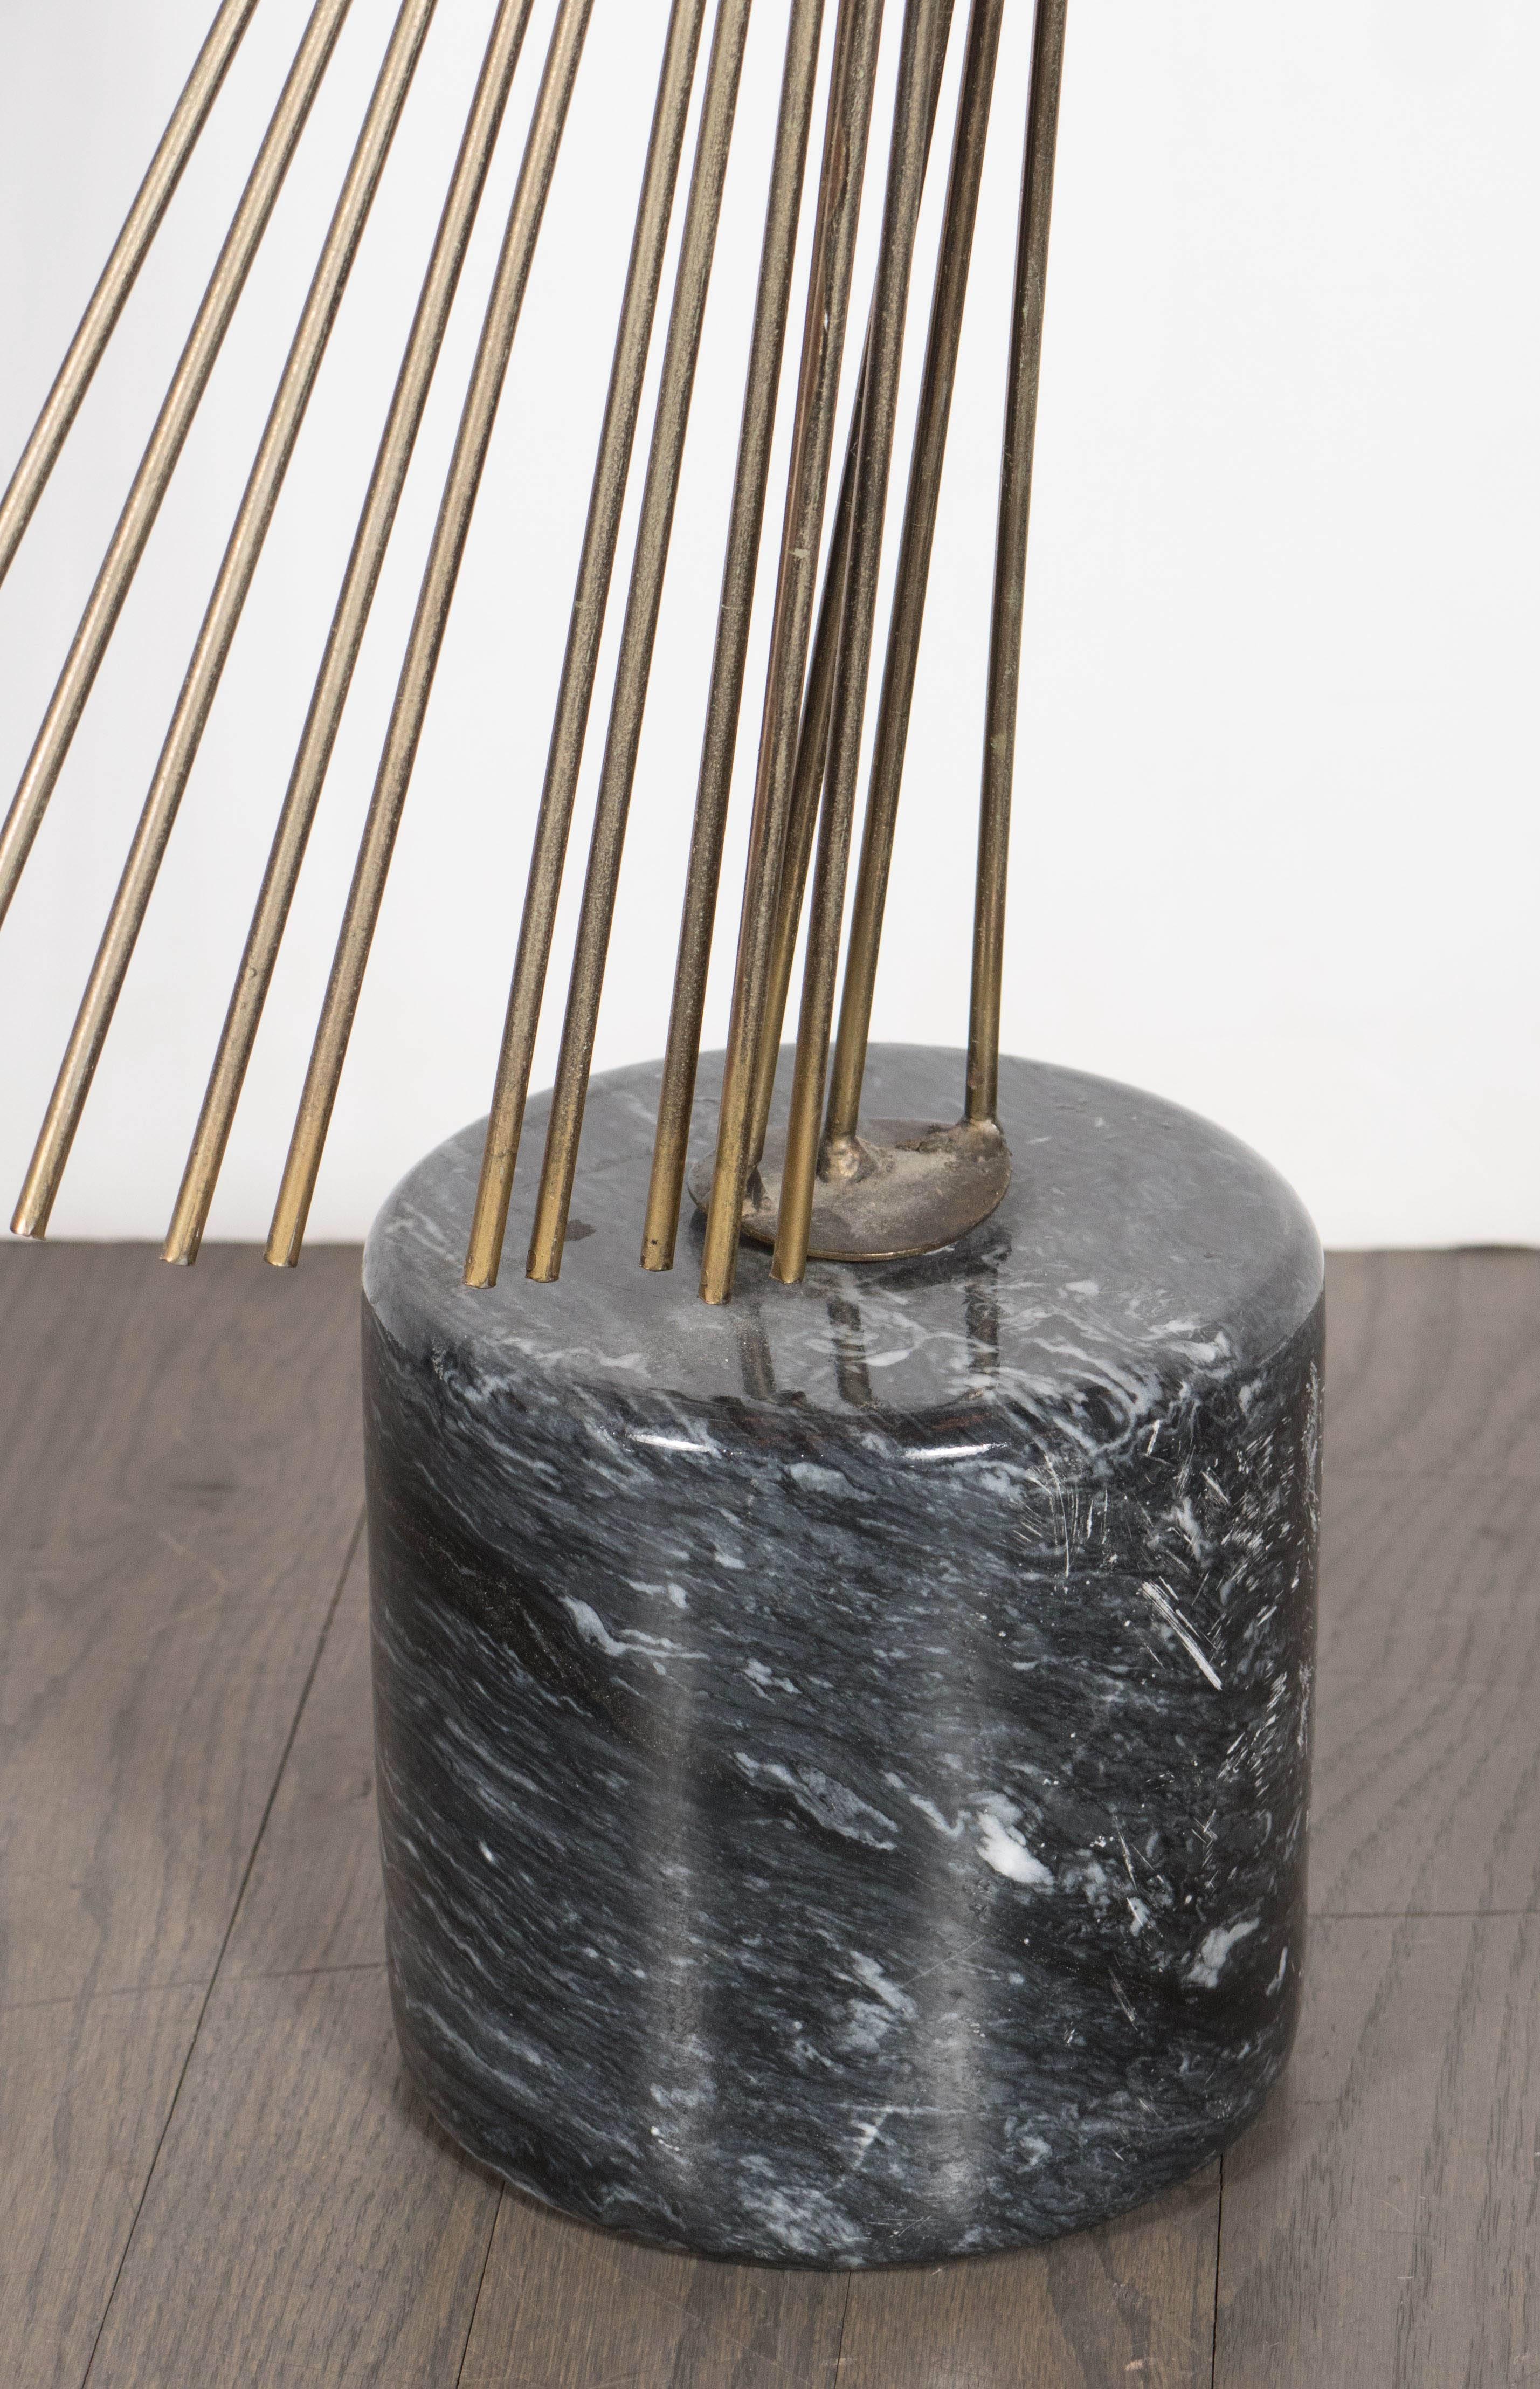 A Brutalist sculpture in patinated brass on a polished black marble plinth by Curtis Jere. A flowing sequence of brass rods connected at a central point depict a fan-like structure. Exotic black marble with white veining comprises the plinth. This